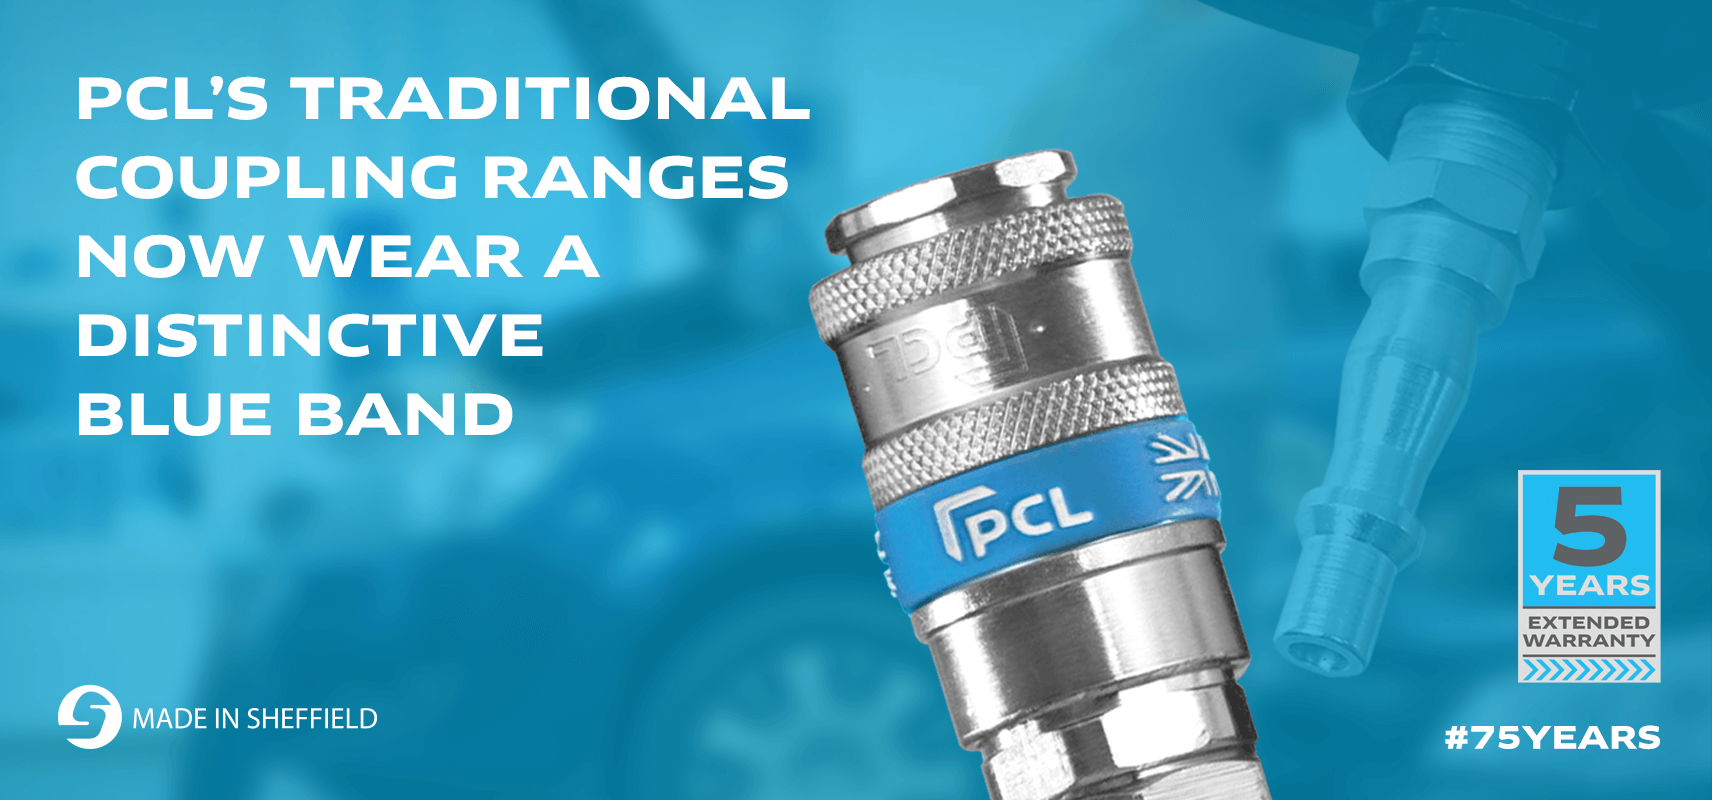 PCL couplings now come with a blue band to guarantee a genuine high quality product